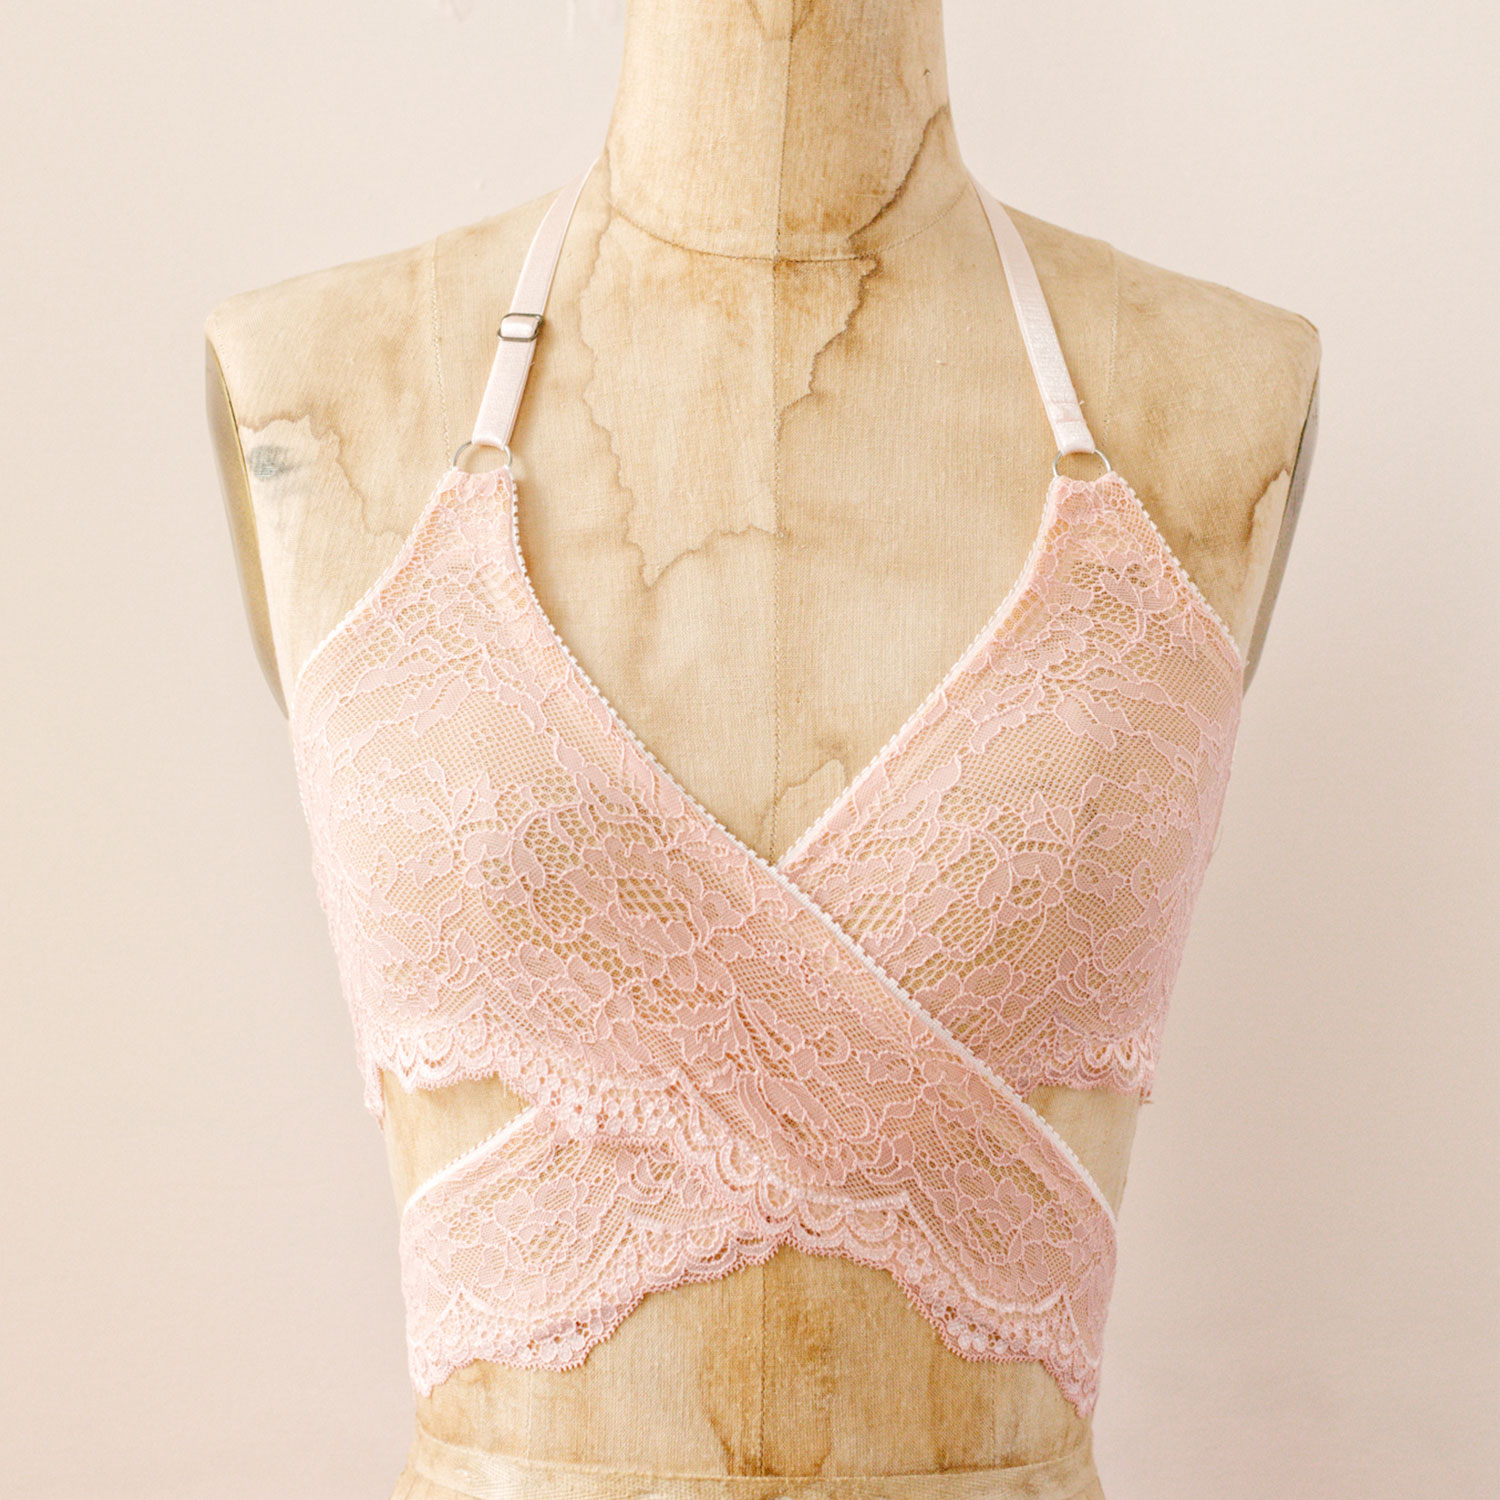 Where to Find Printable PDF Bralette Patterns | At First Blush Patterns